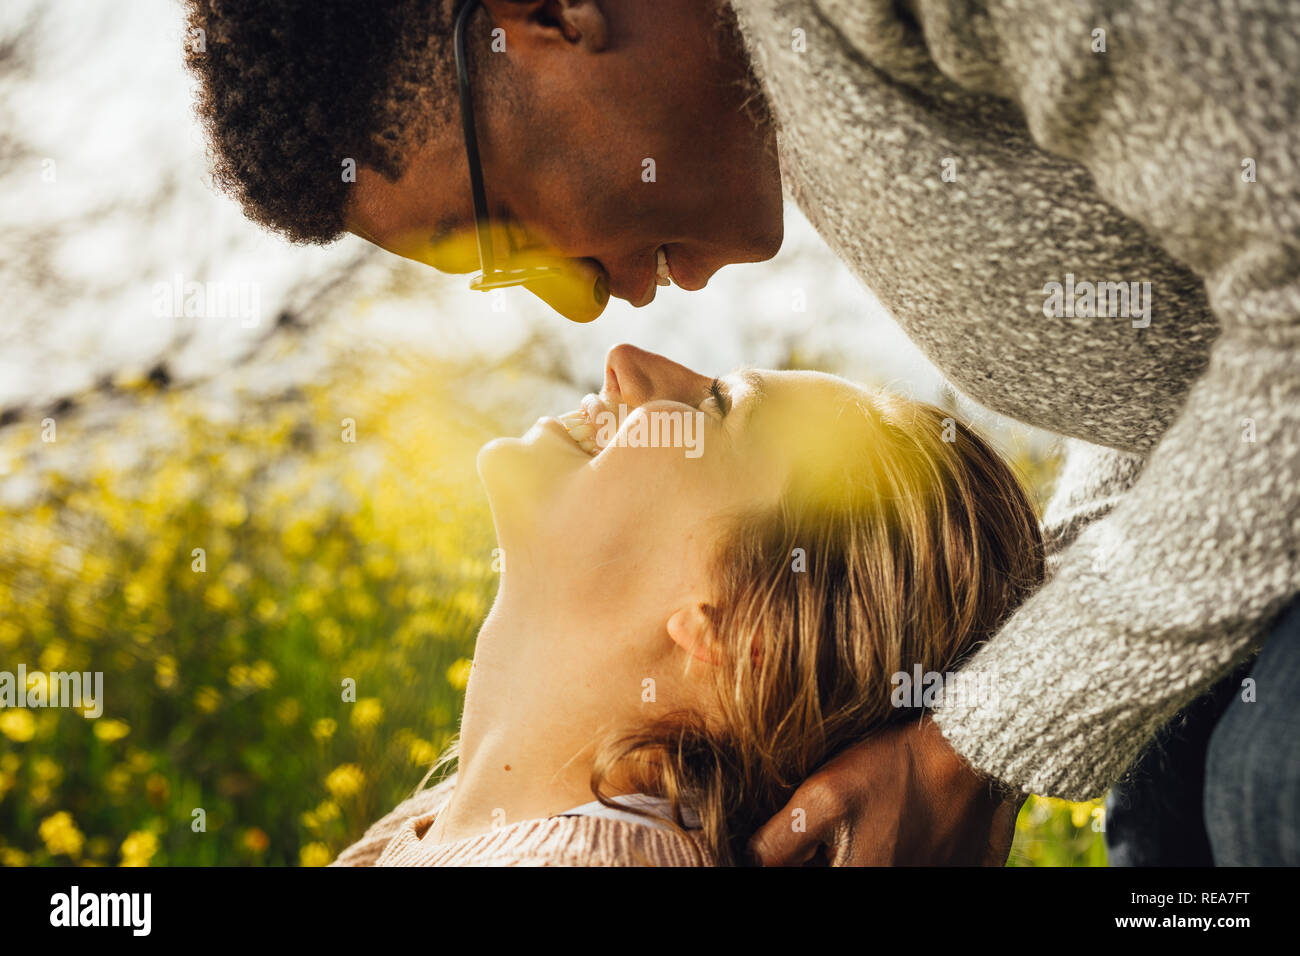 Close up of young man and woman looking at each other with love. Interracial couple outdoors in meadow. Stock Photo